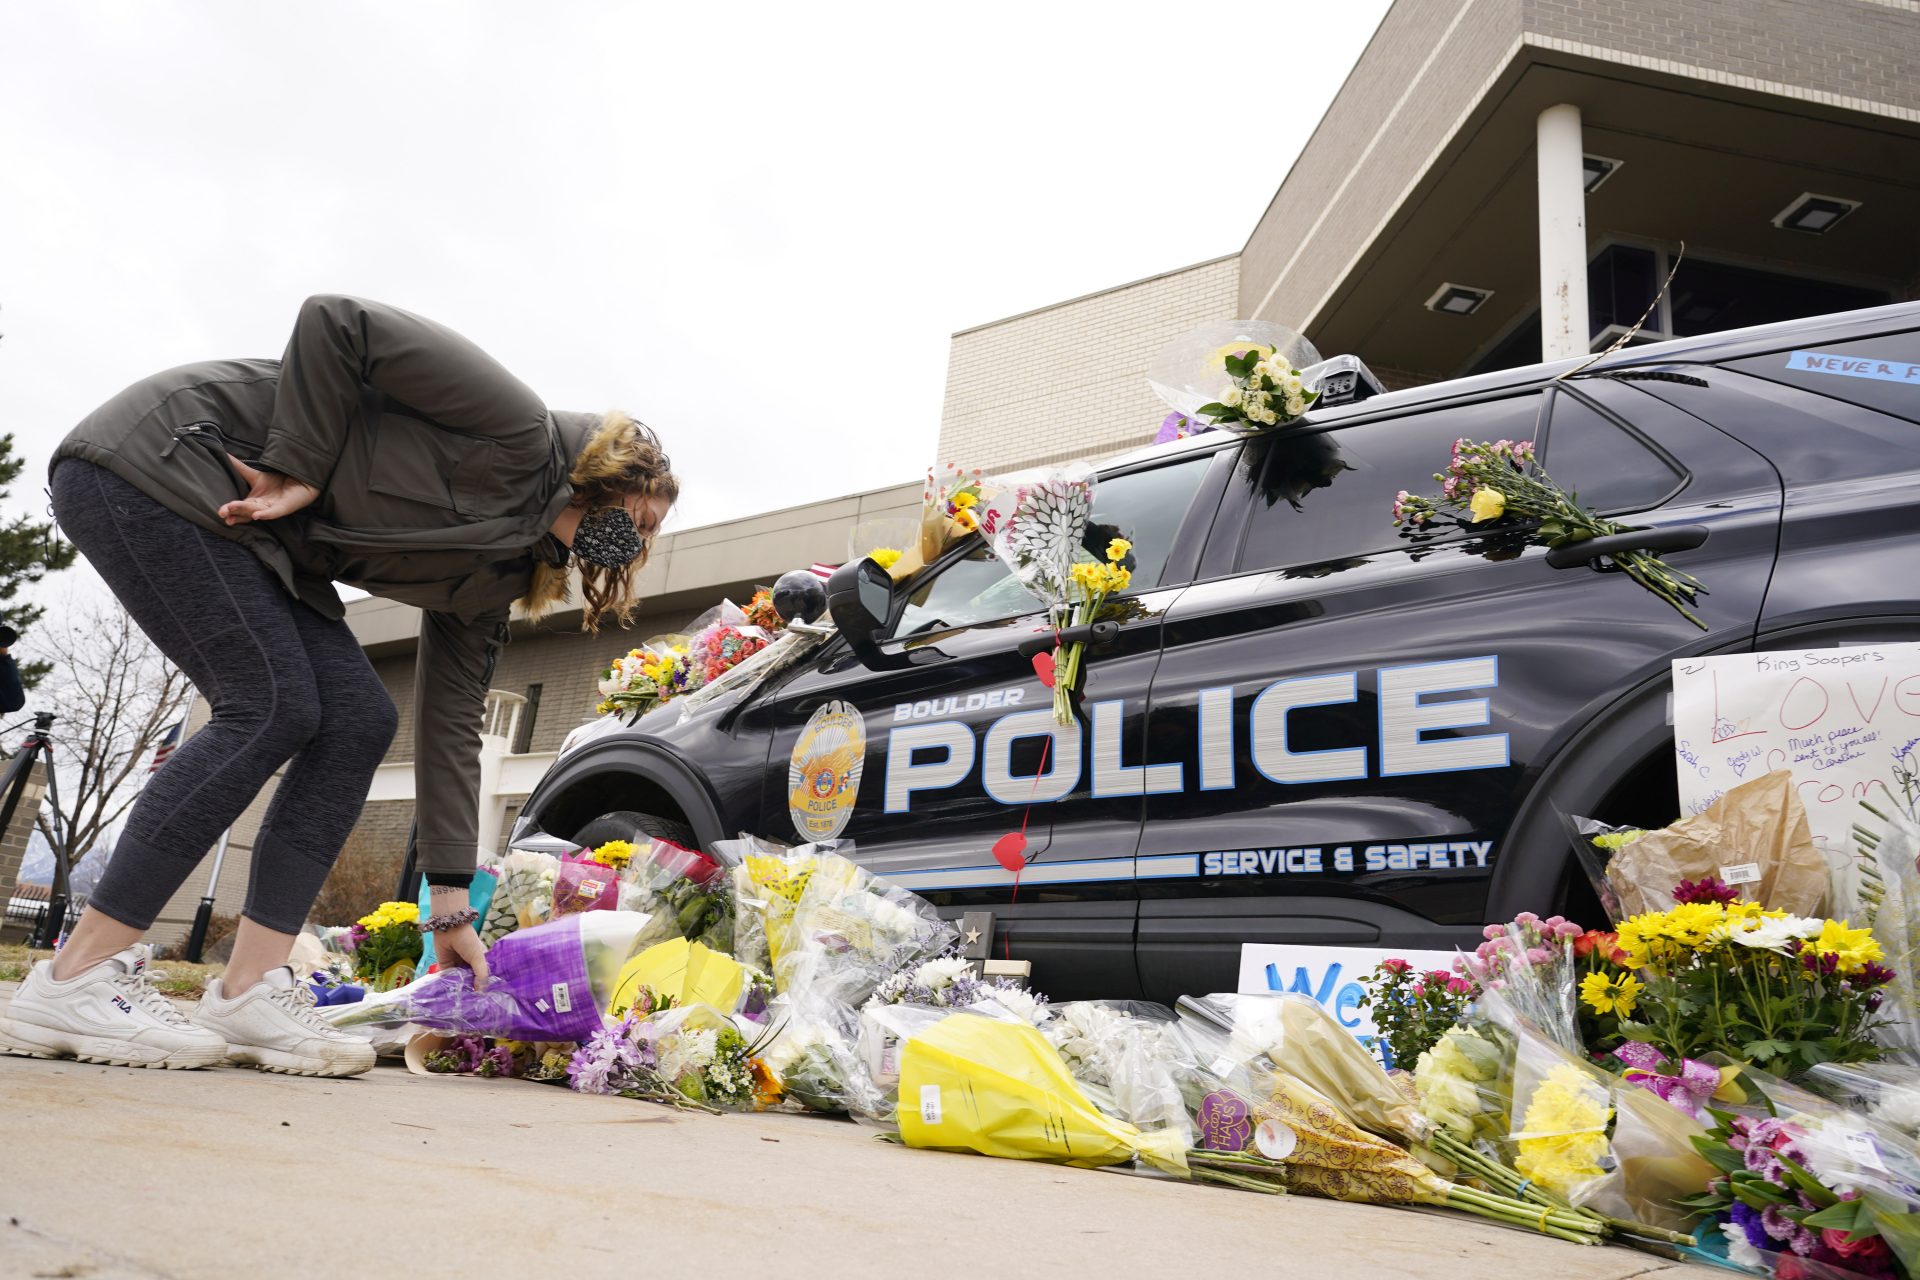 A woman leaves a bouquet of flowers next to a police cruiser parked outside the Boulder Police Department after an officer was one of the victims of a mass shooting at a King Soopers grocery store Tuesday, March 23, 2021, in Boulder, Colo.